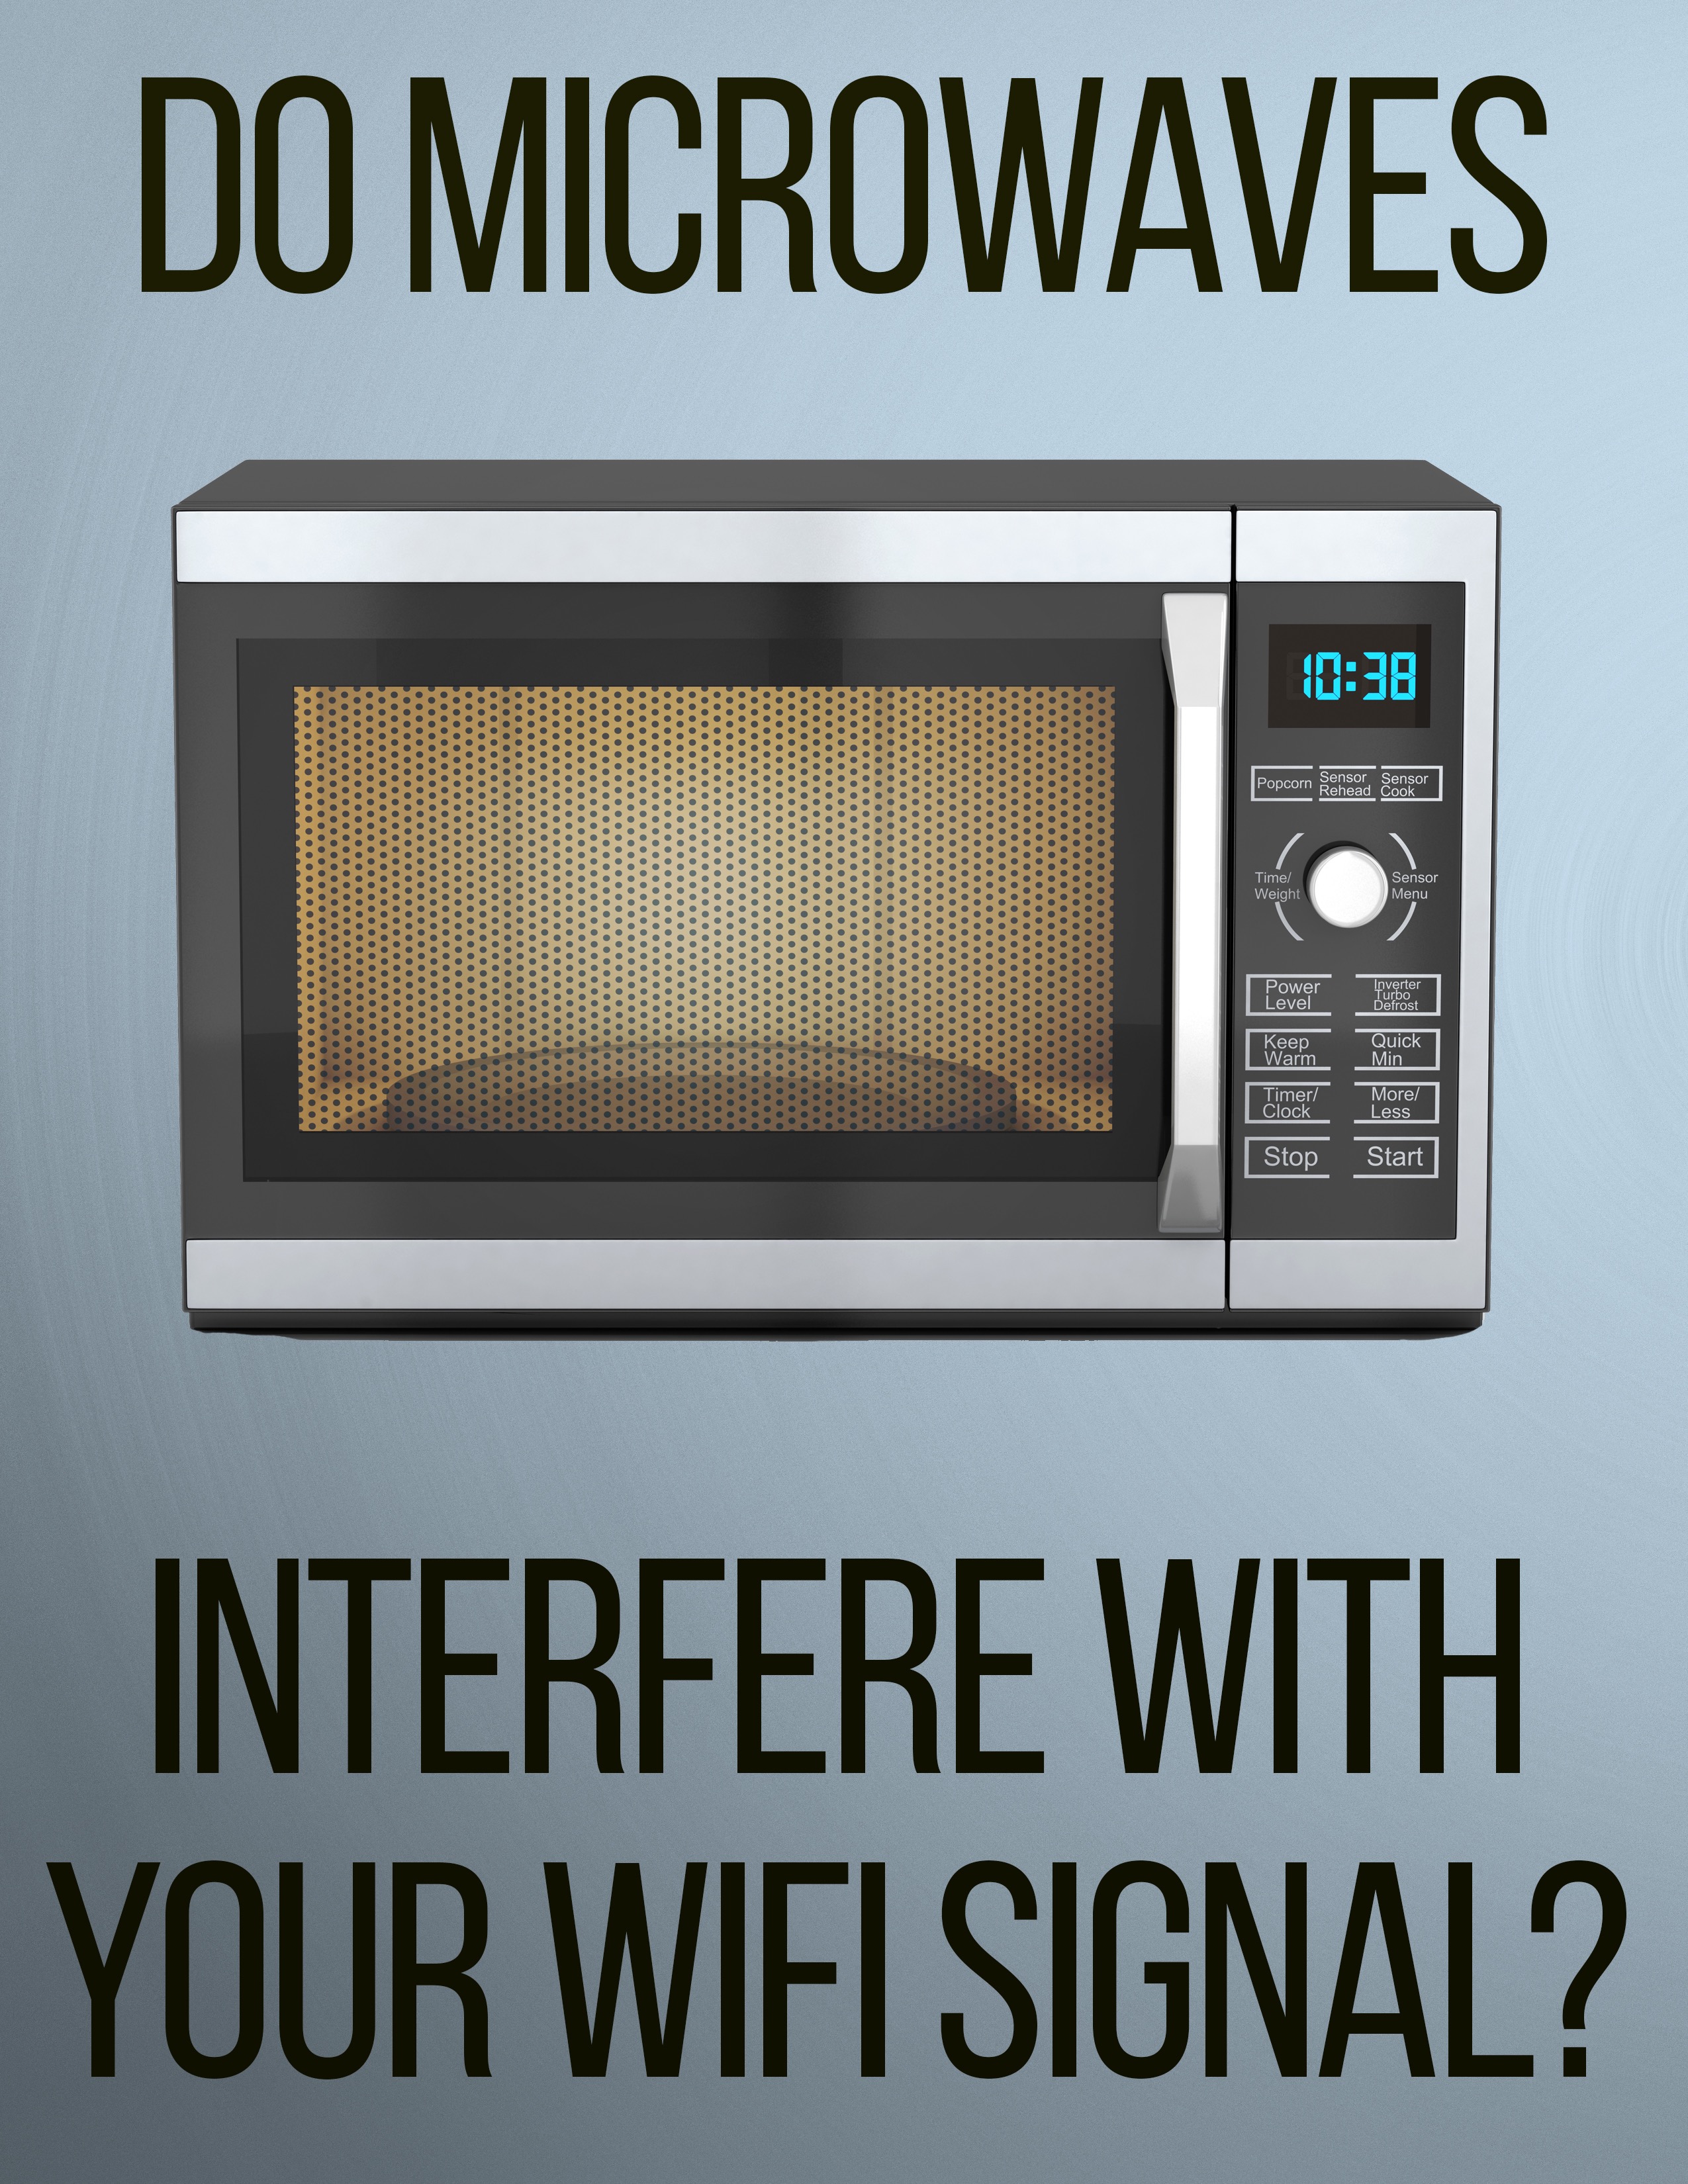 Can Microwaves Interfere with Wi-Fi Signals? | Elizabethtown College